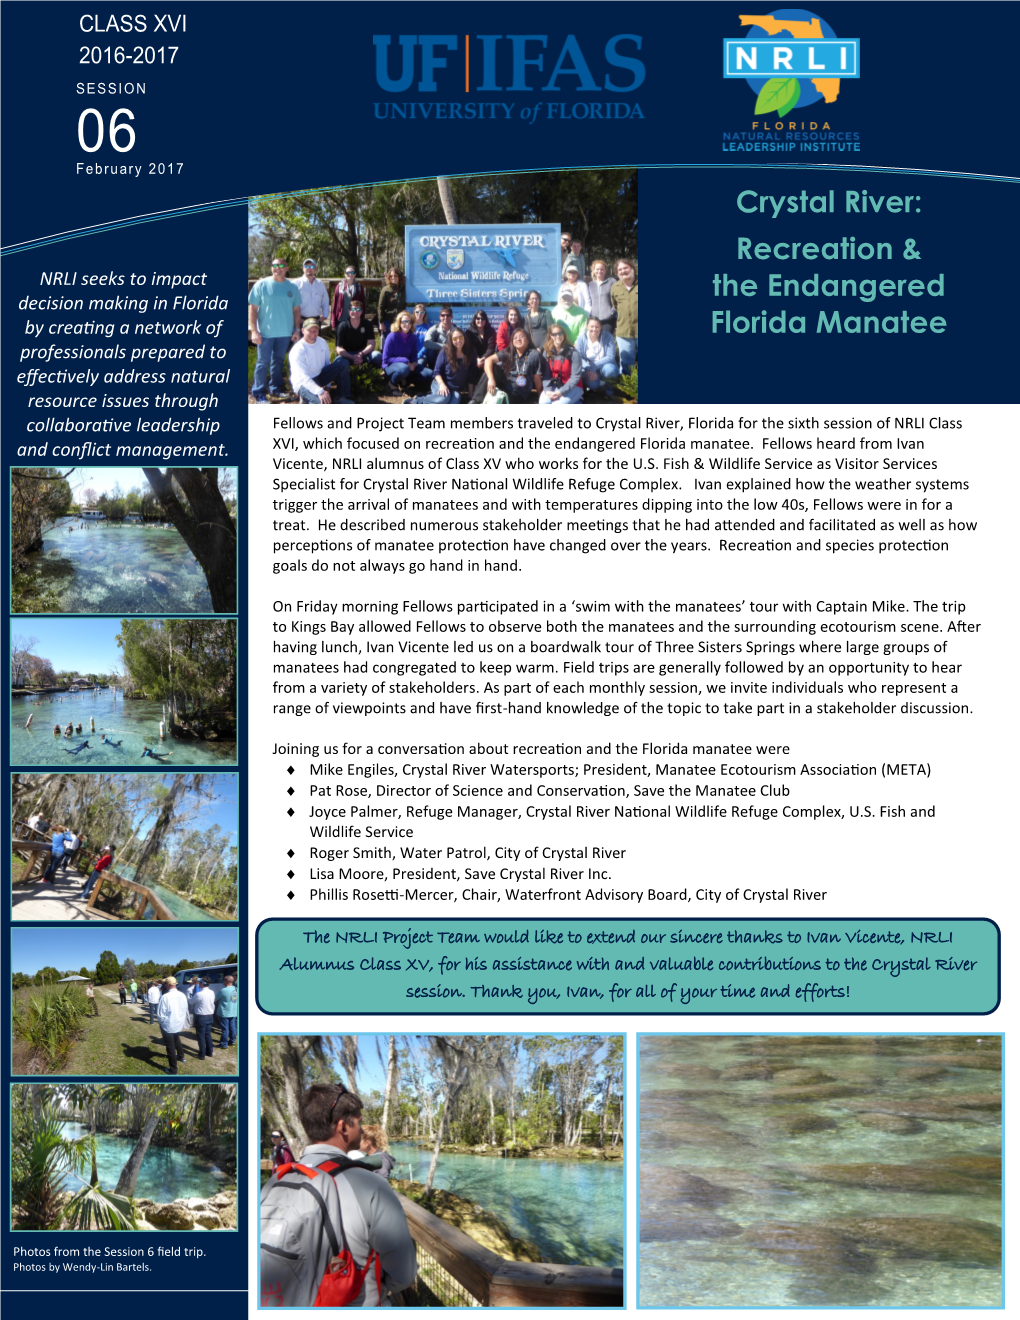 Session 6: Crystal River: Recreation & the Endangered Florida Manatee